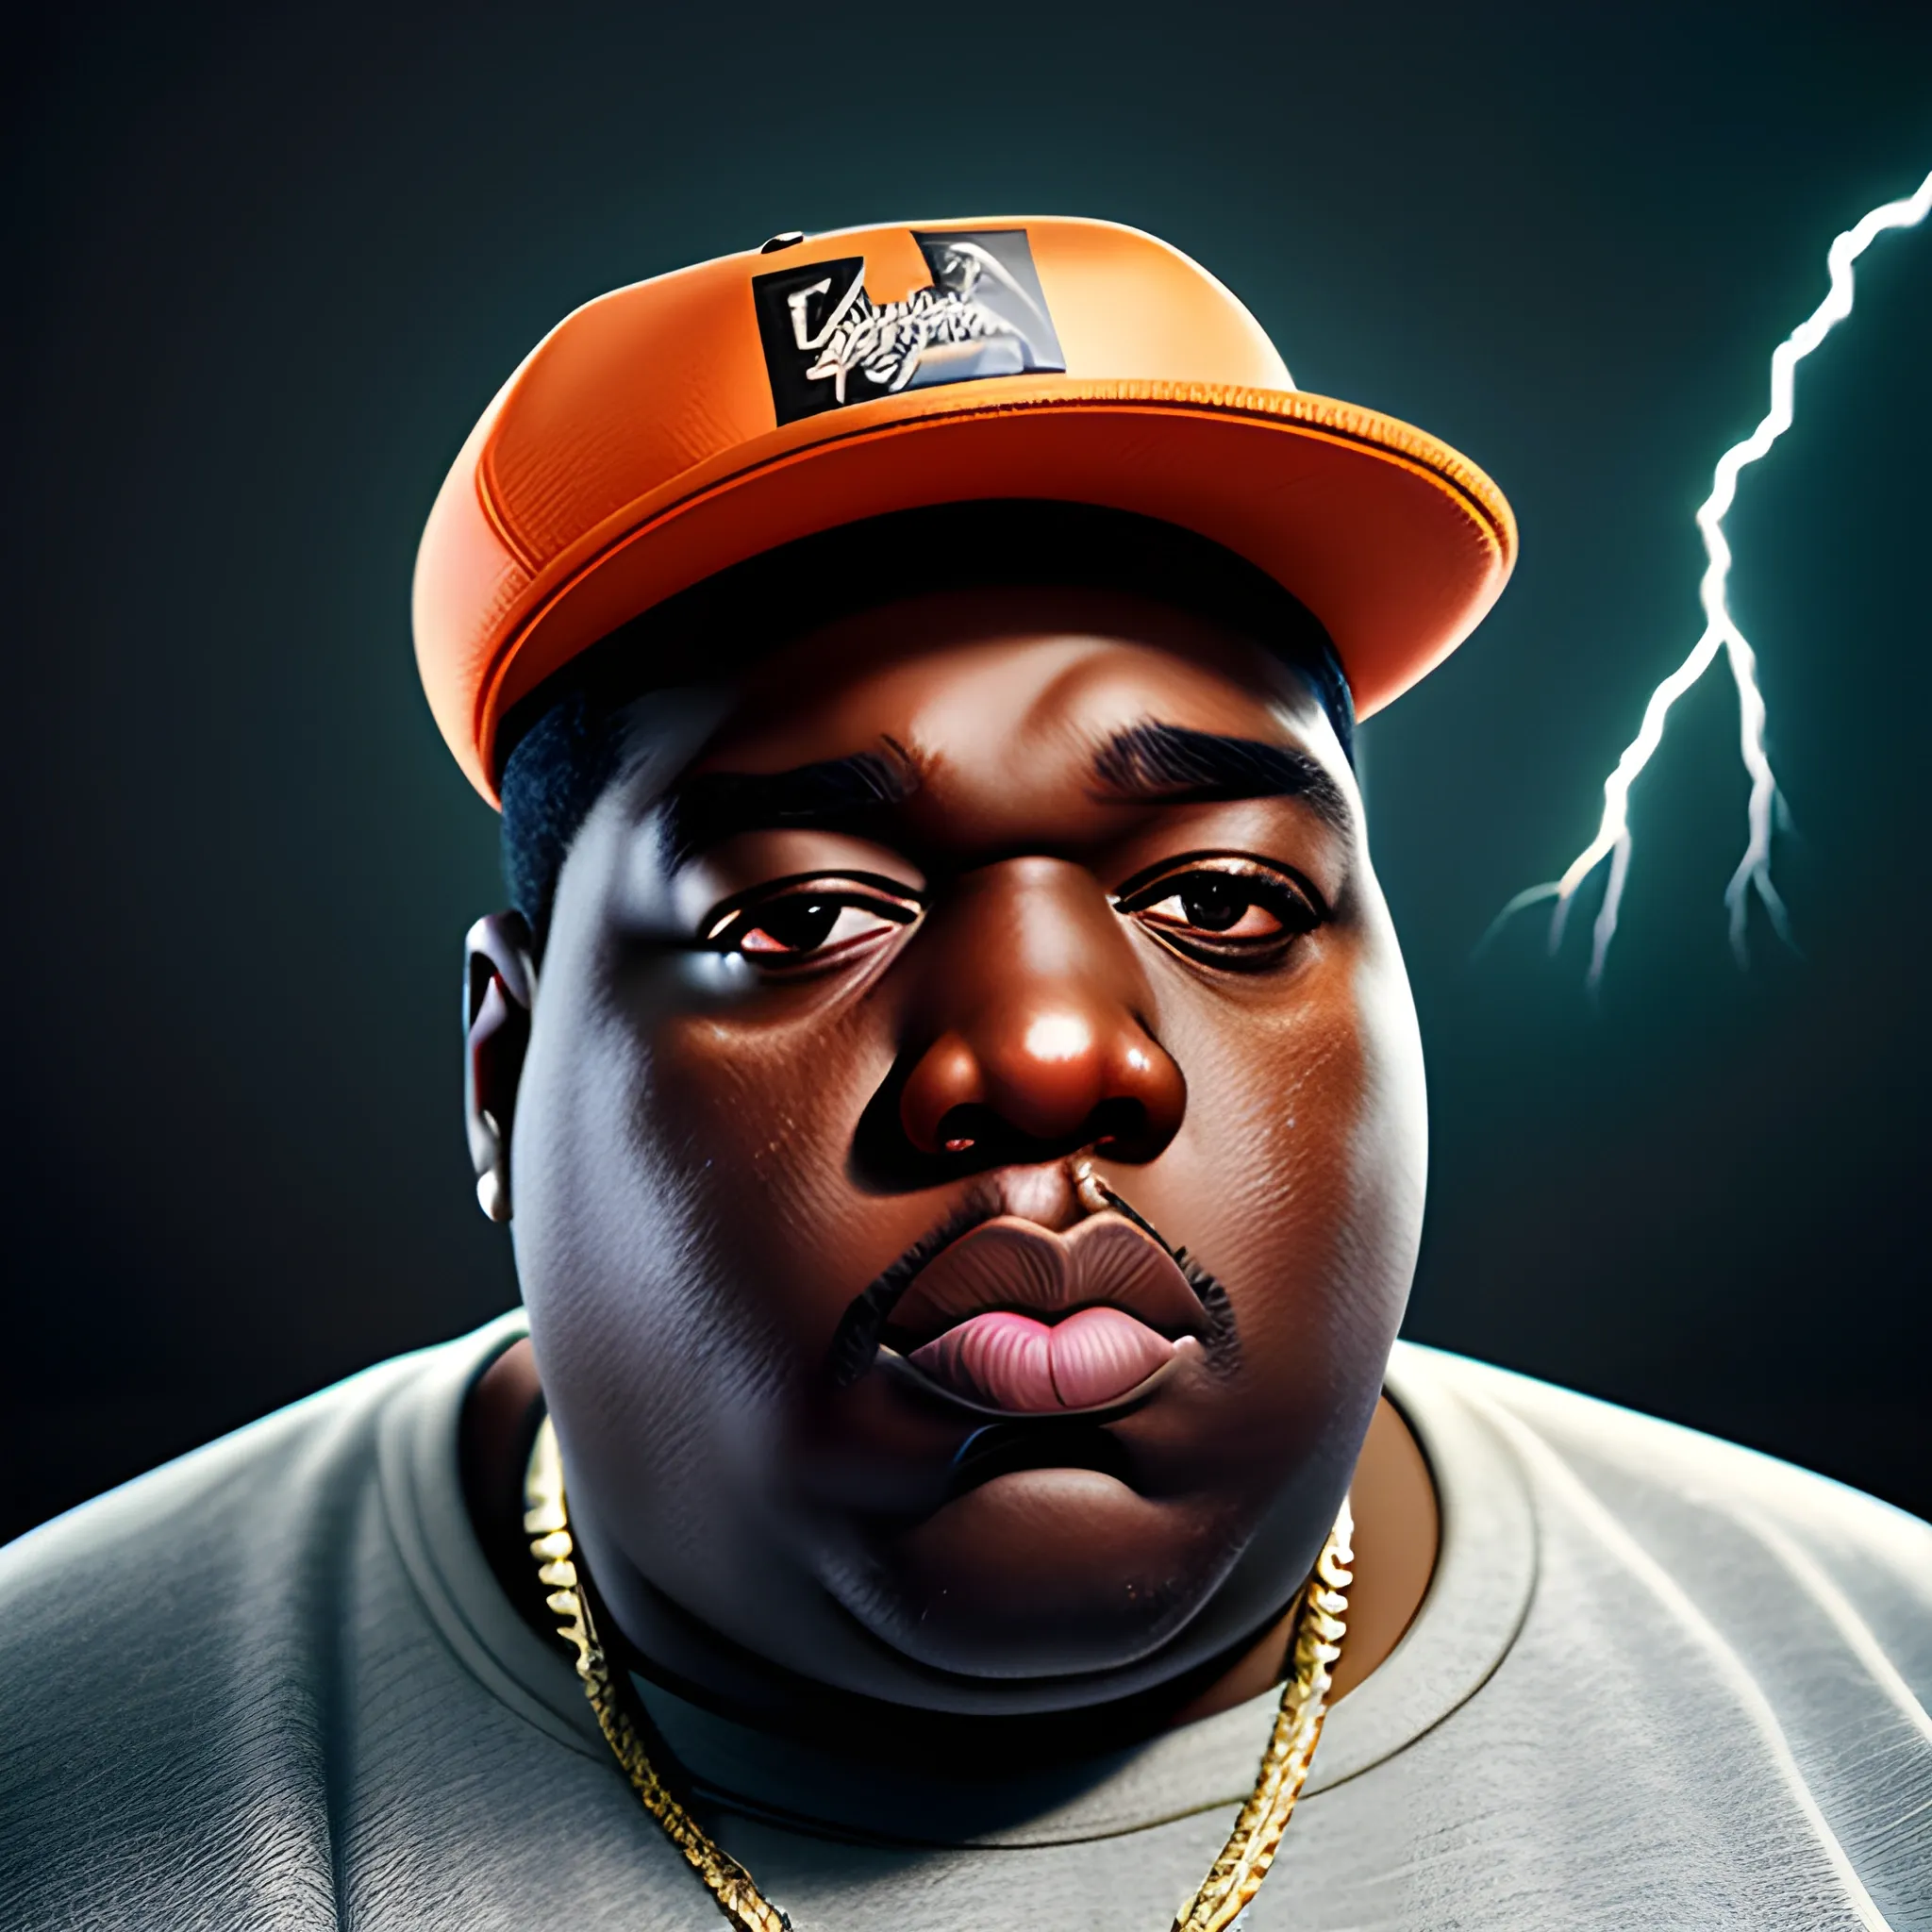 Photorealistic Image of Biggie Smalls at 60 years old, dimmed li ...